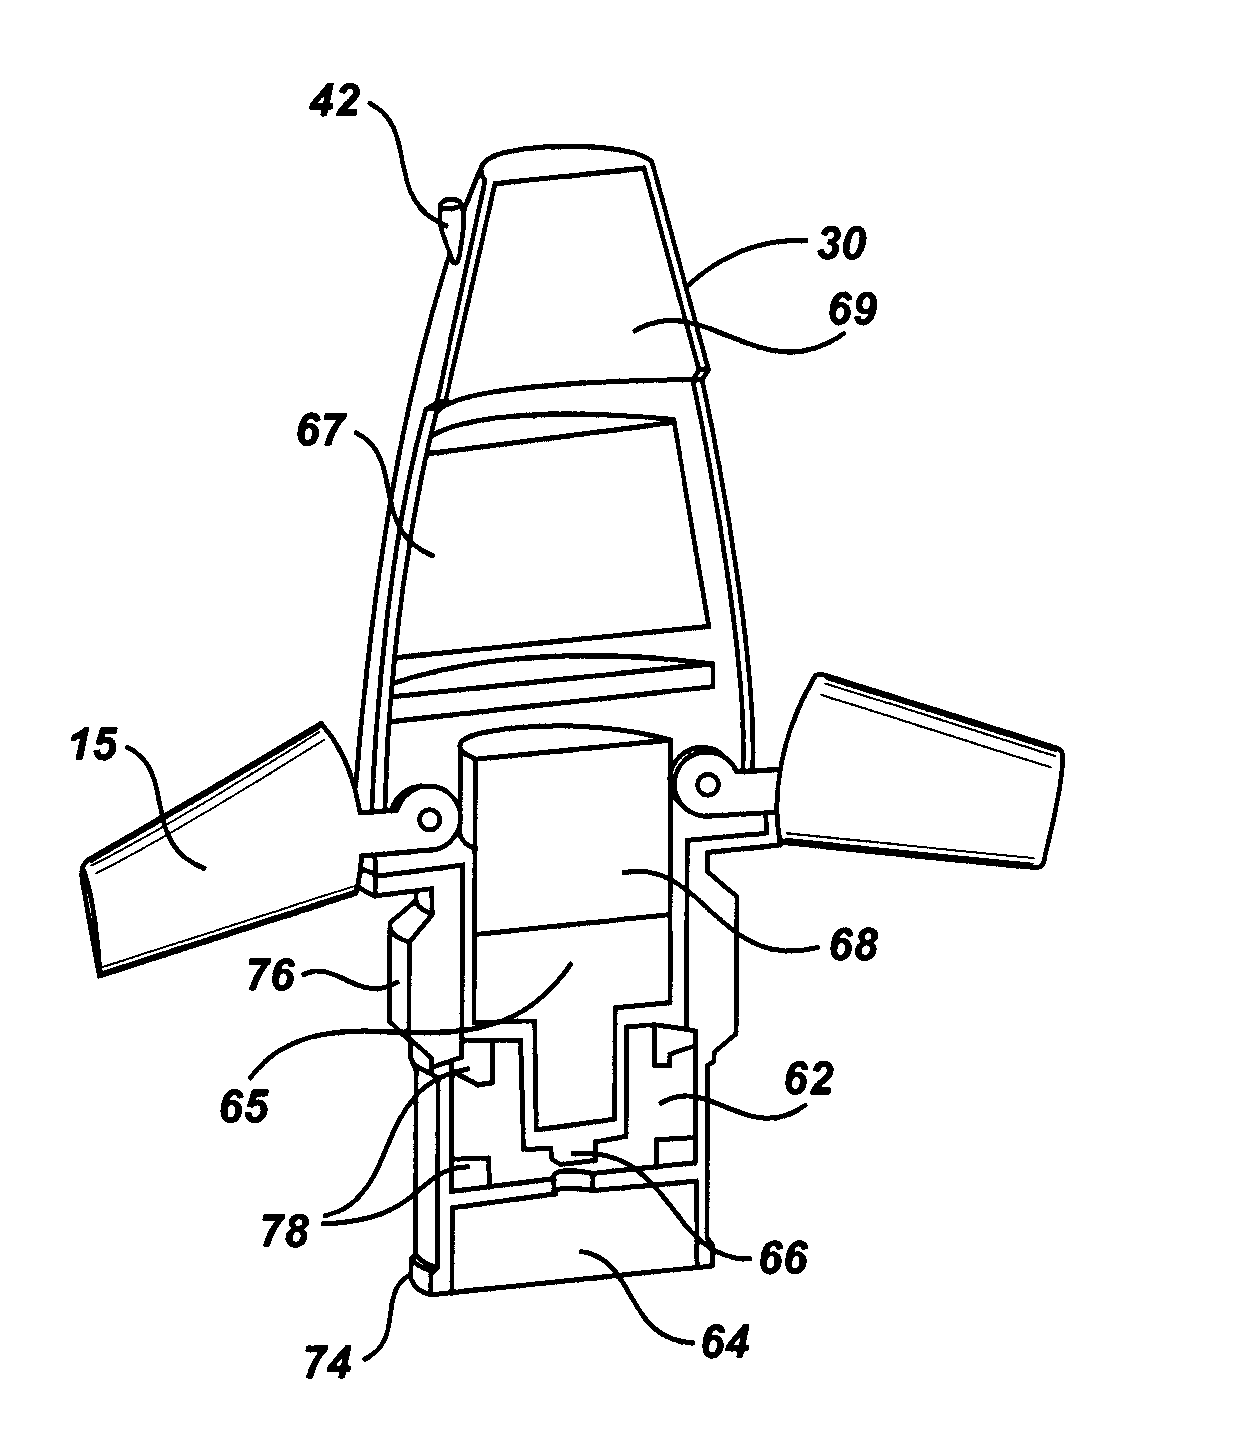 Projectile trajectory control system